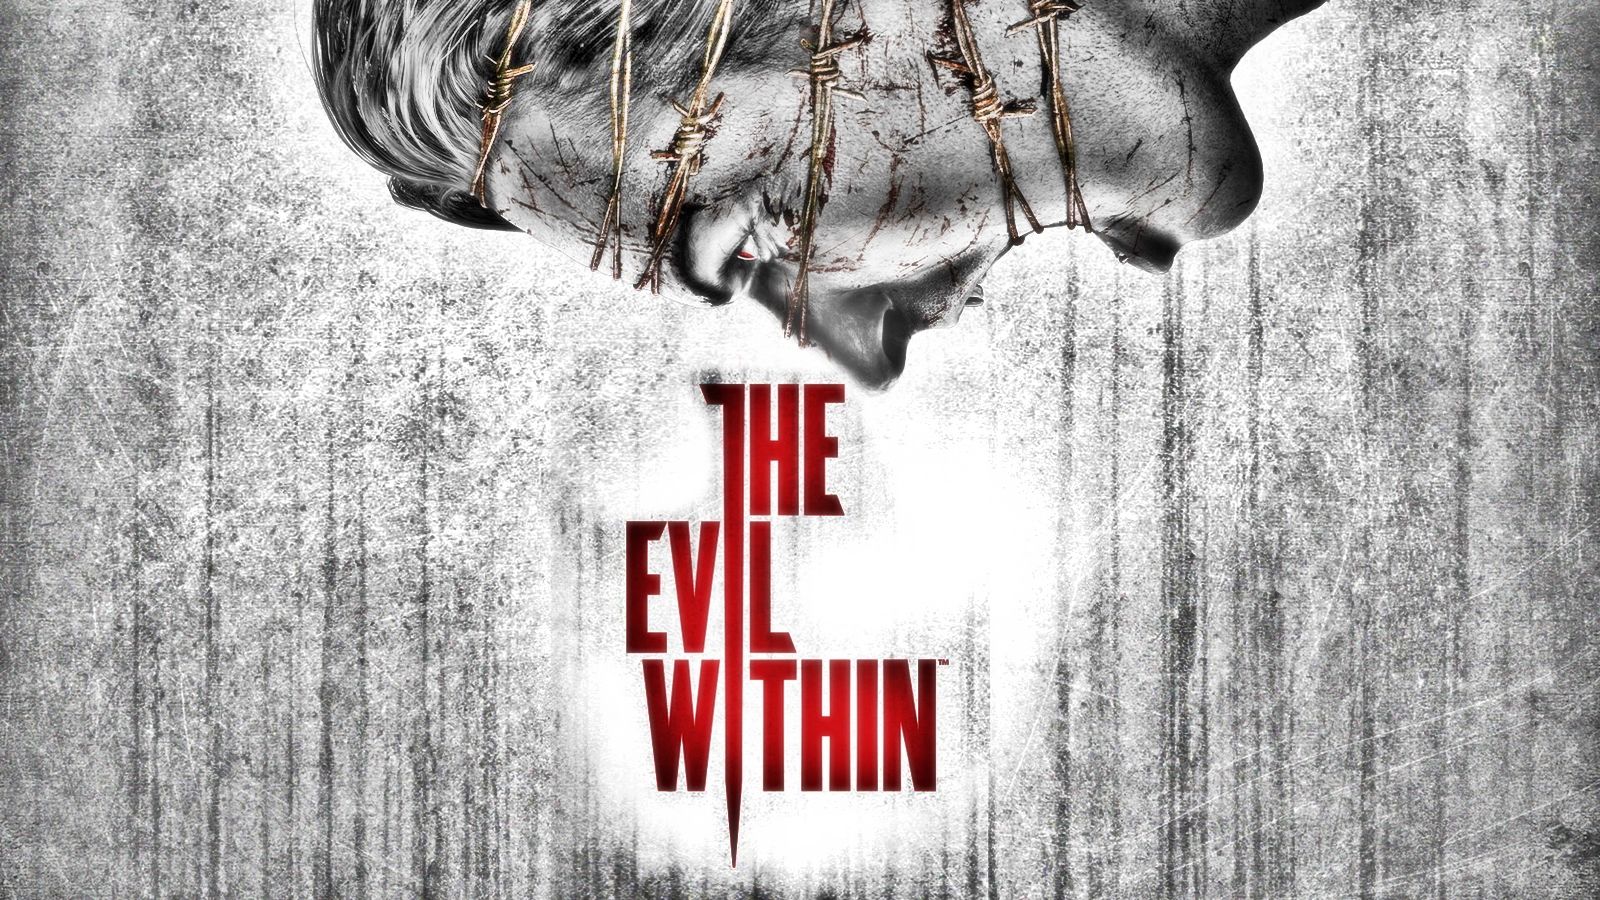 The Evil Within Wallpaper HD Wide Screen